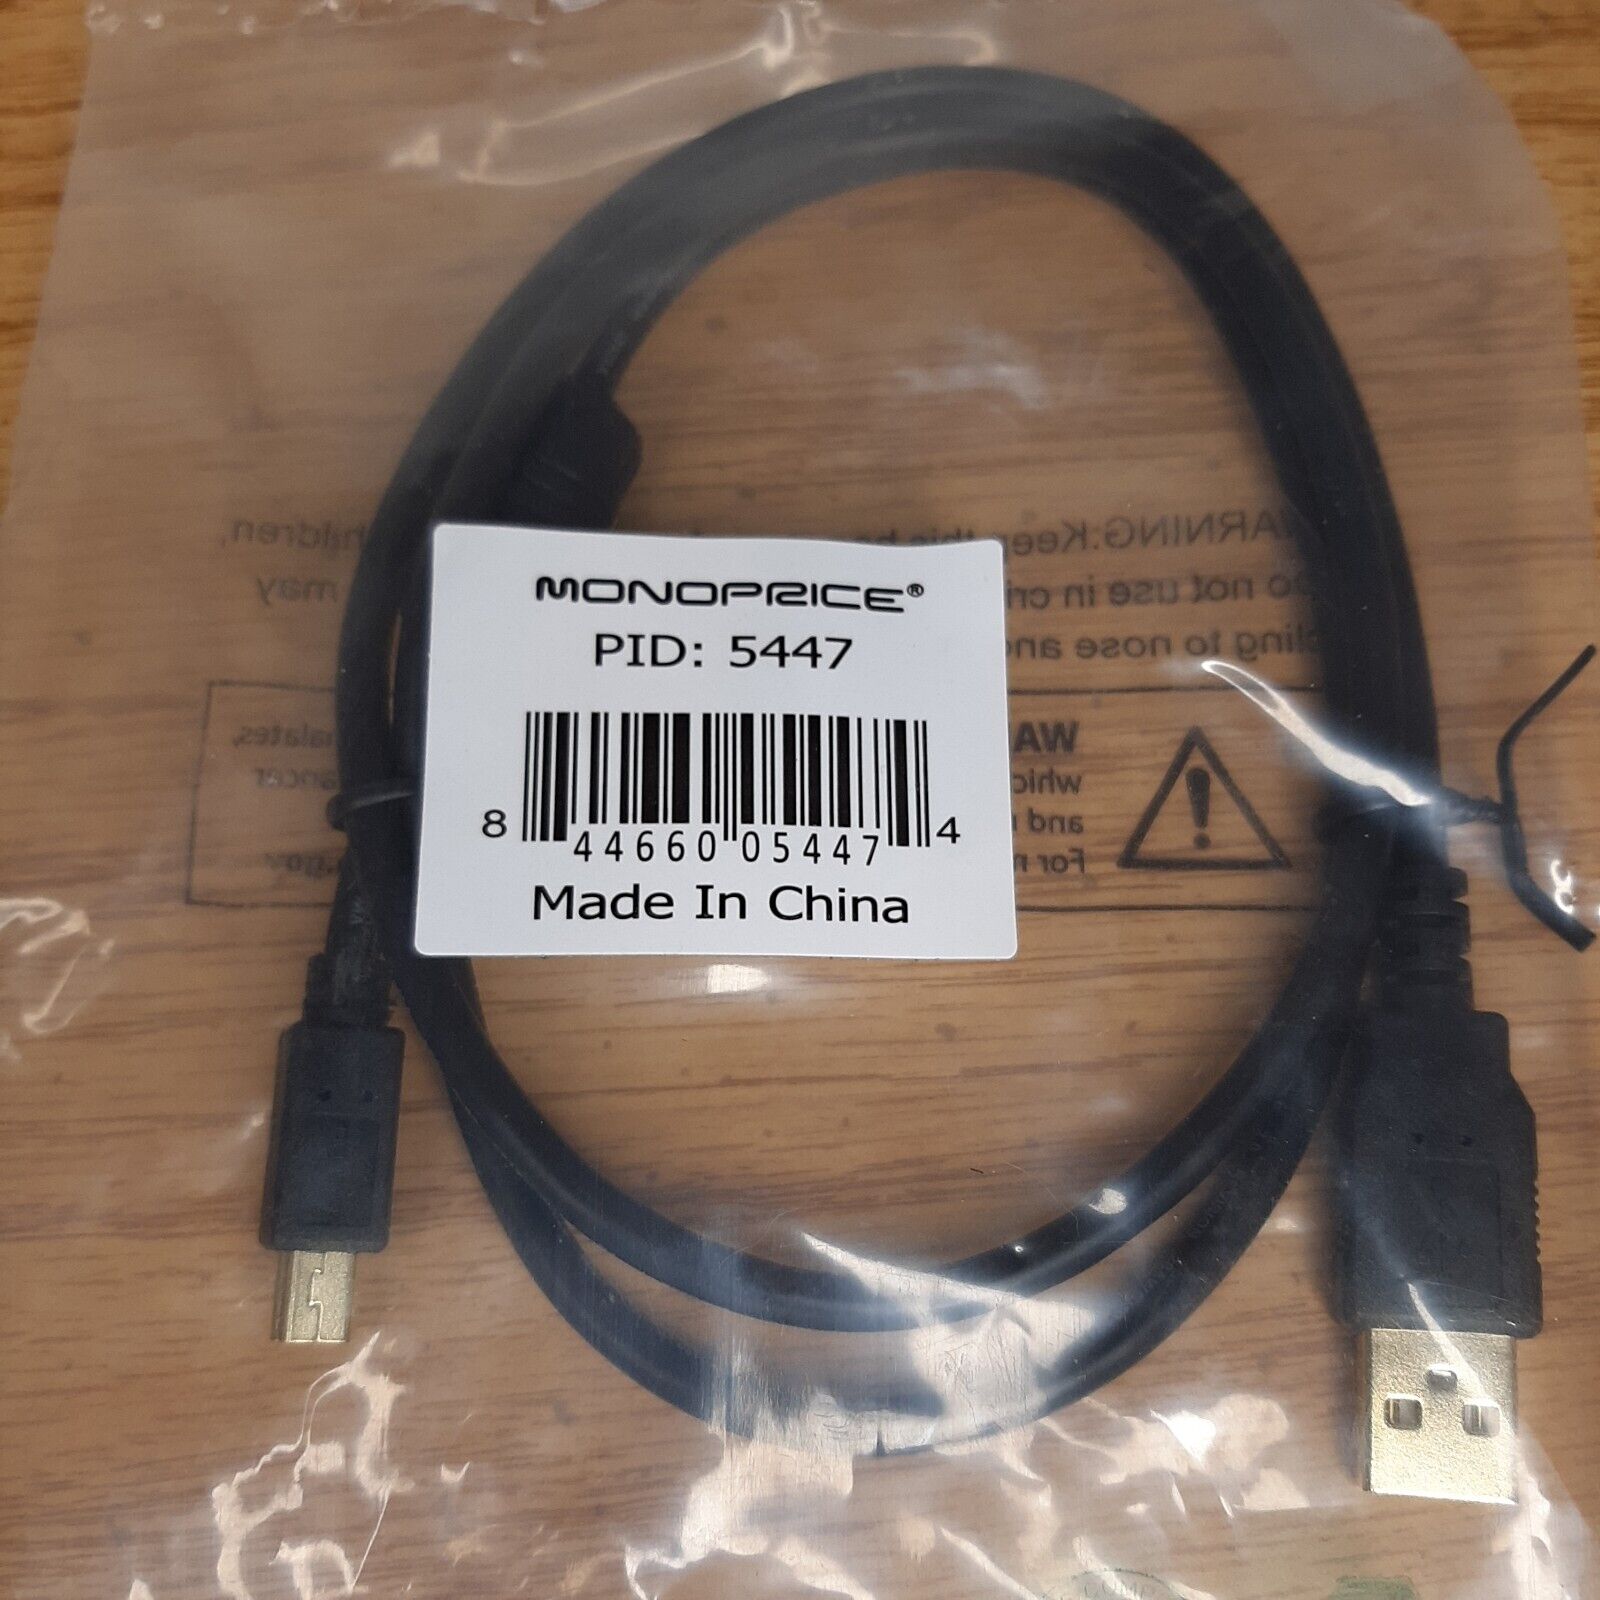 MONOPRICE USB Cable: 2.0, 3 ft Lg, Black, A Male to 5 Pin B Mini Male PID: 5447